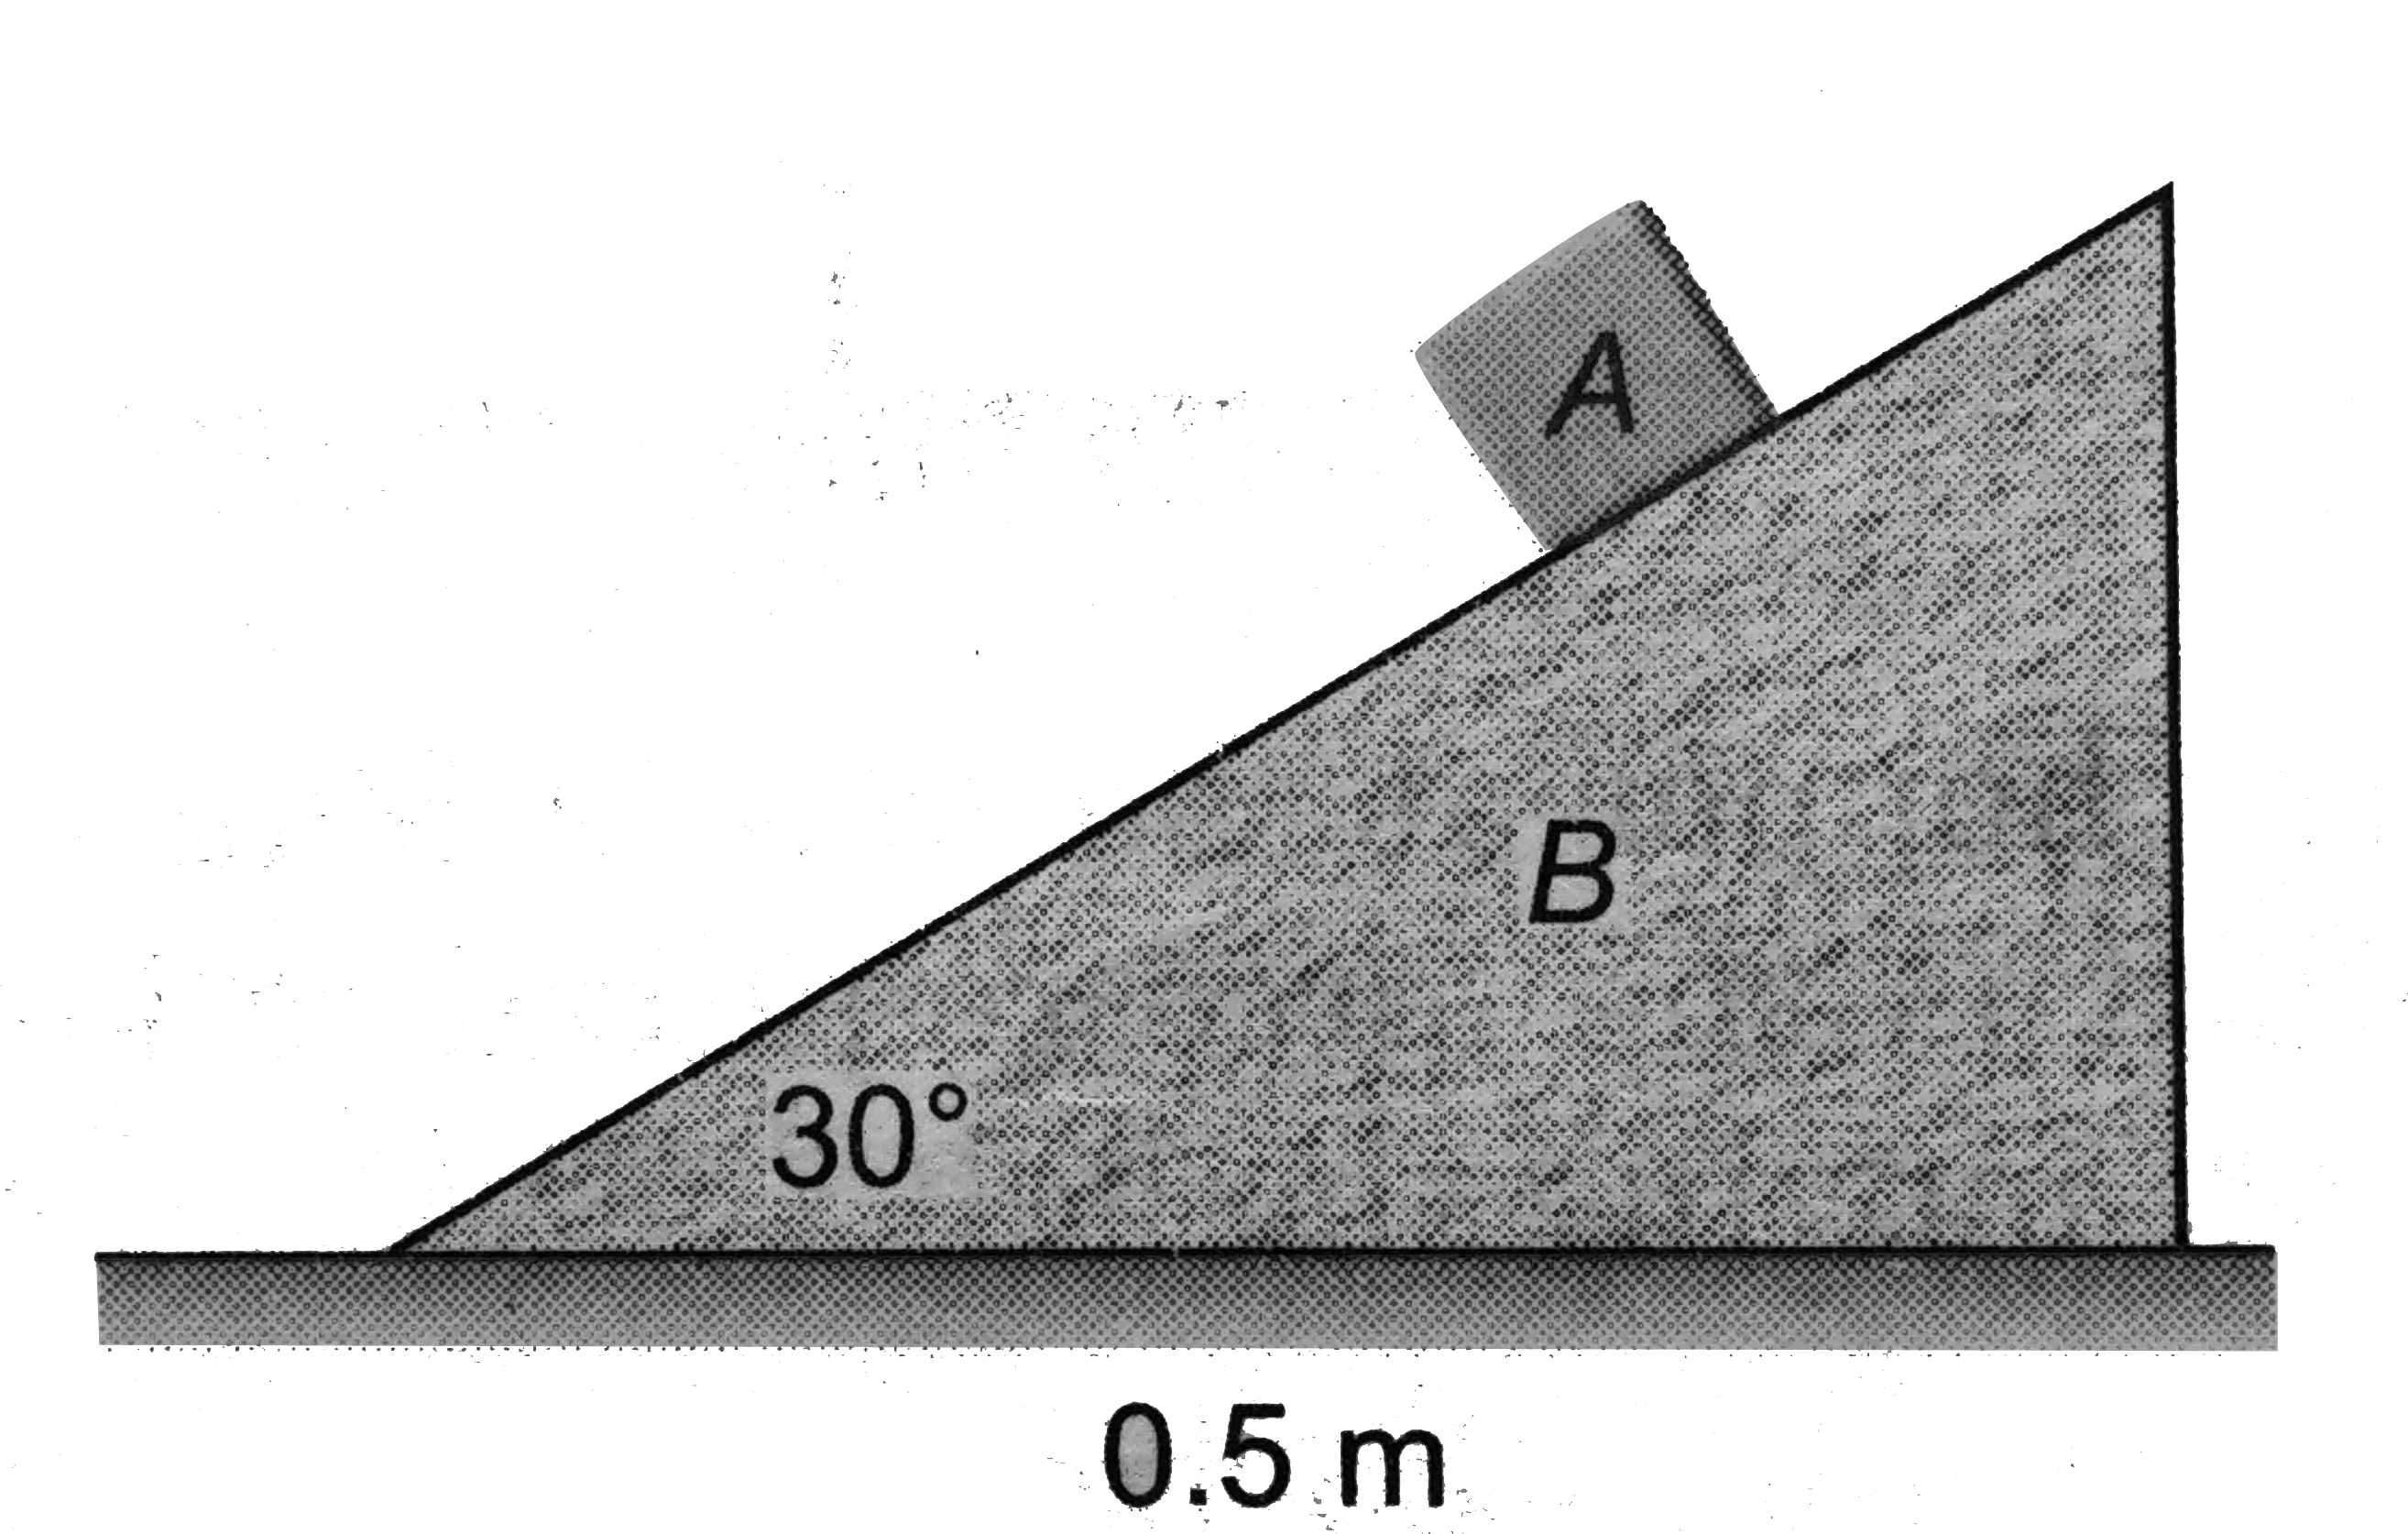 Block A has a mass of 5kg and is placed on top of a smooth triangular block, B having a mass of 30kg. If the system is released from rest, determine the distance, B moves when A reaches the bottom. Neglect the size of block A.